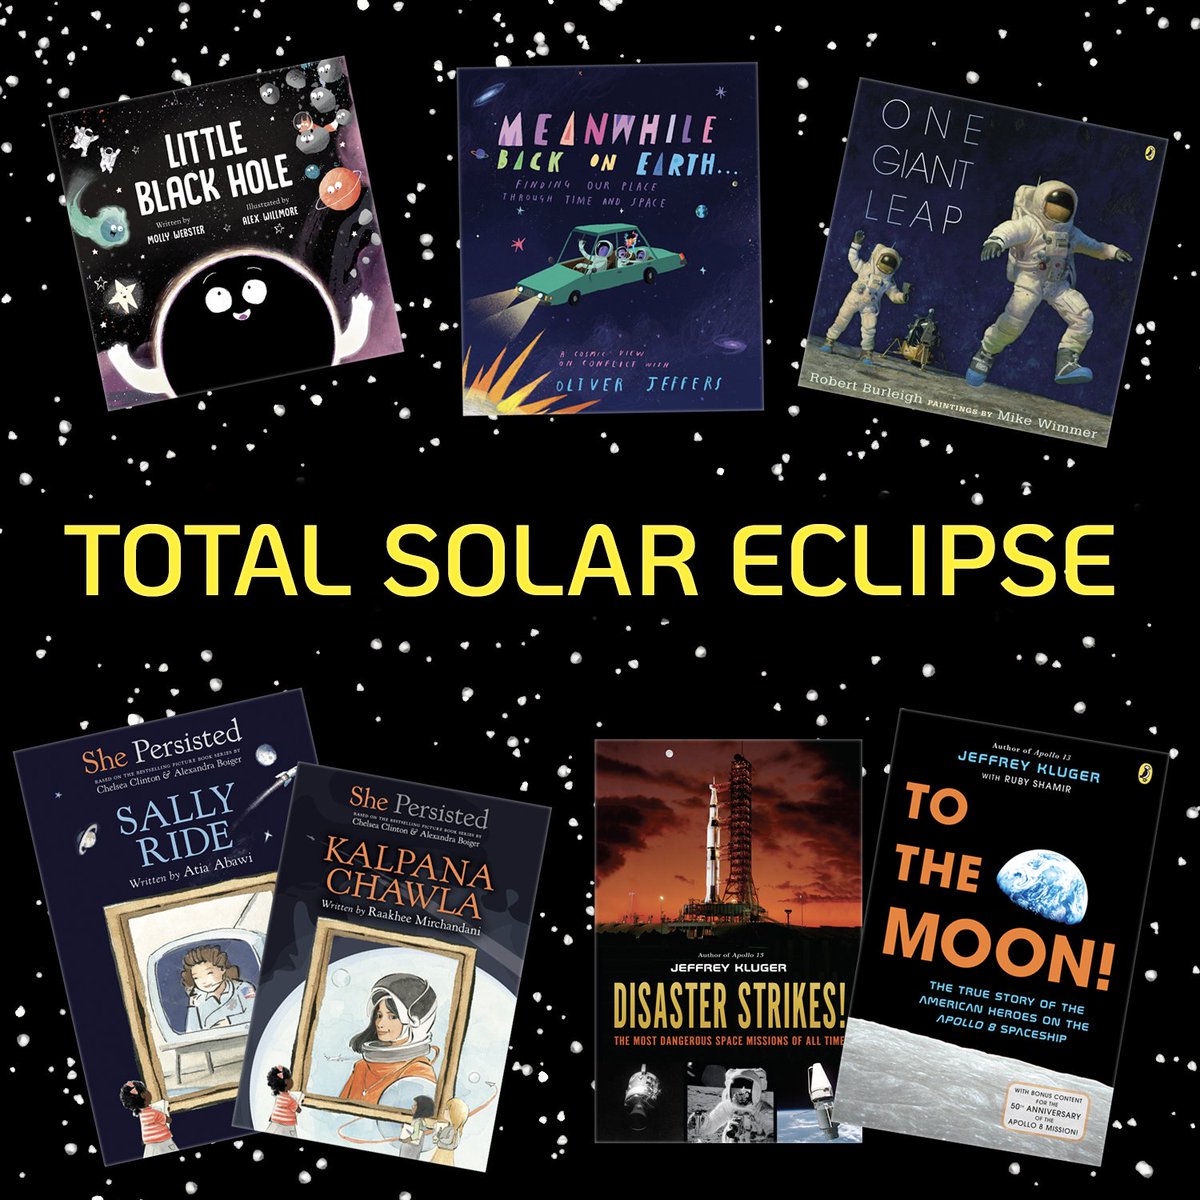 🌄 Whether or not you're in the path of today's #SolarEclipse, enjoy these books to remember just how amazing our universe is! ☀️